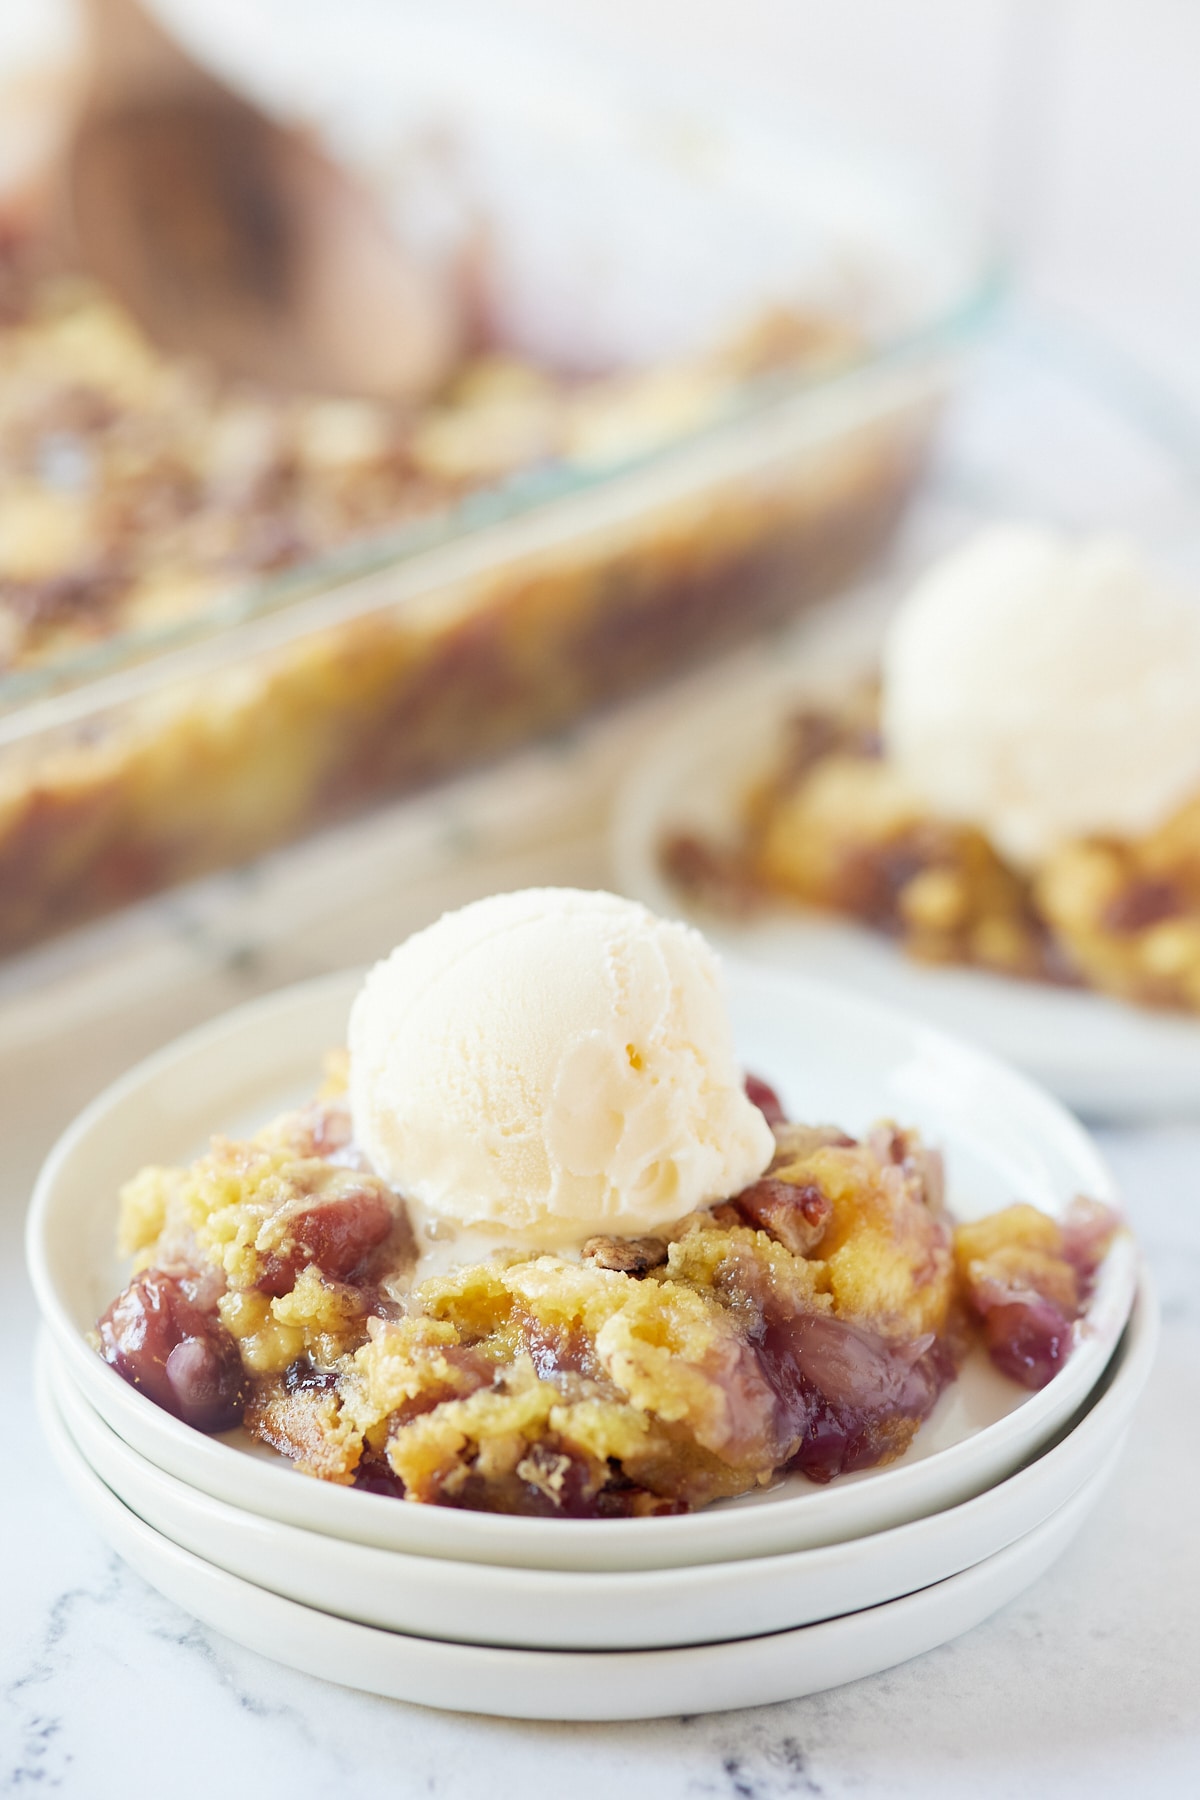 Cherry pineapple dump cake served on a plate with ice cream.